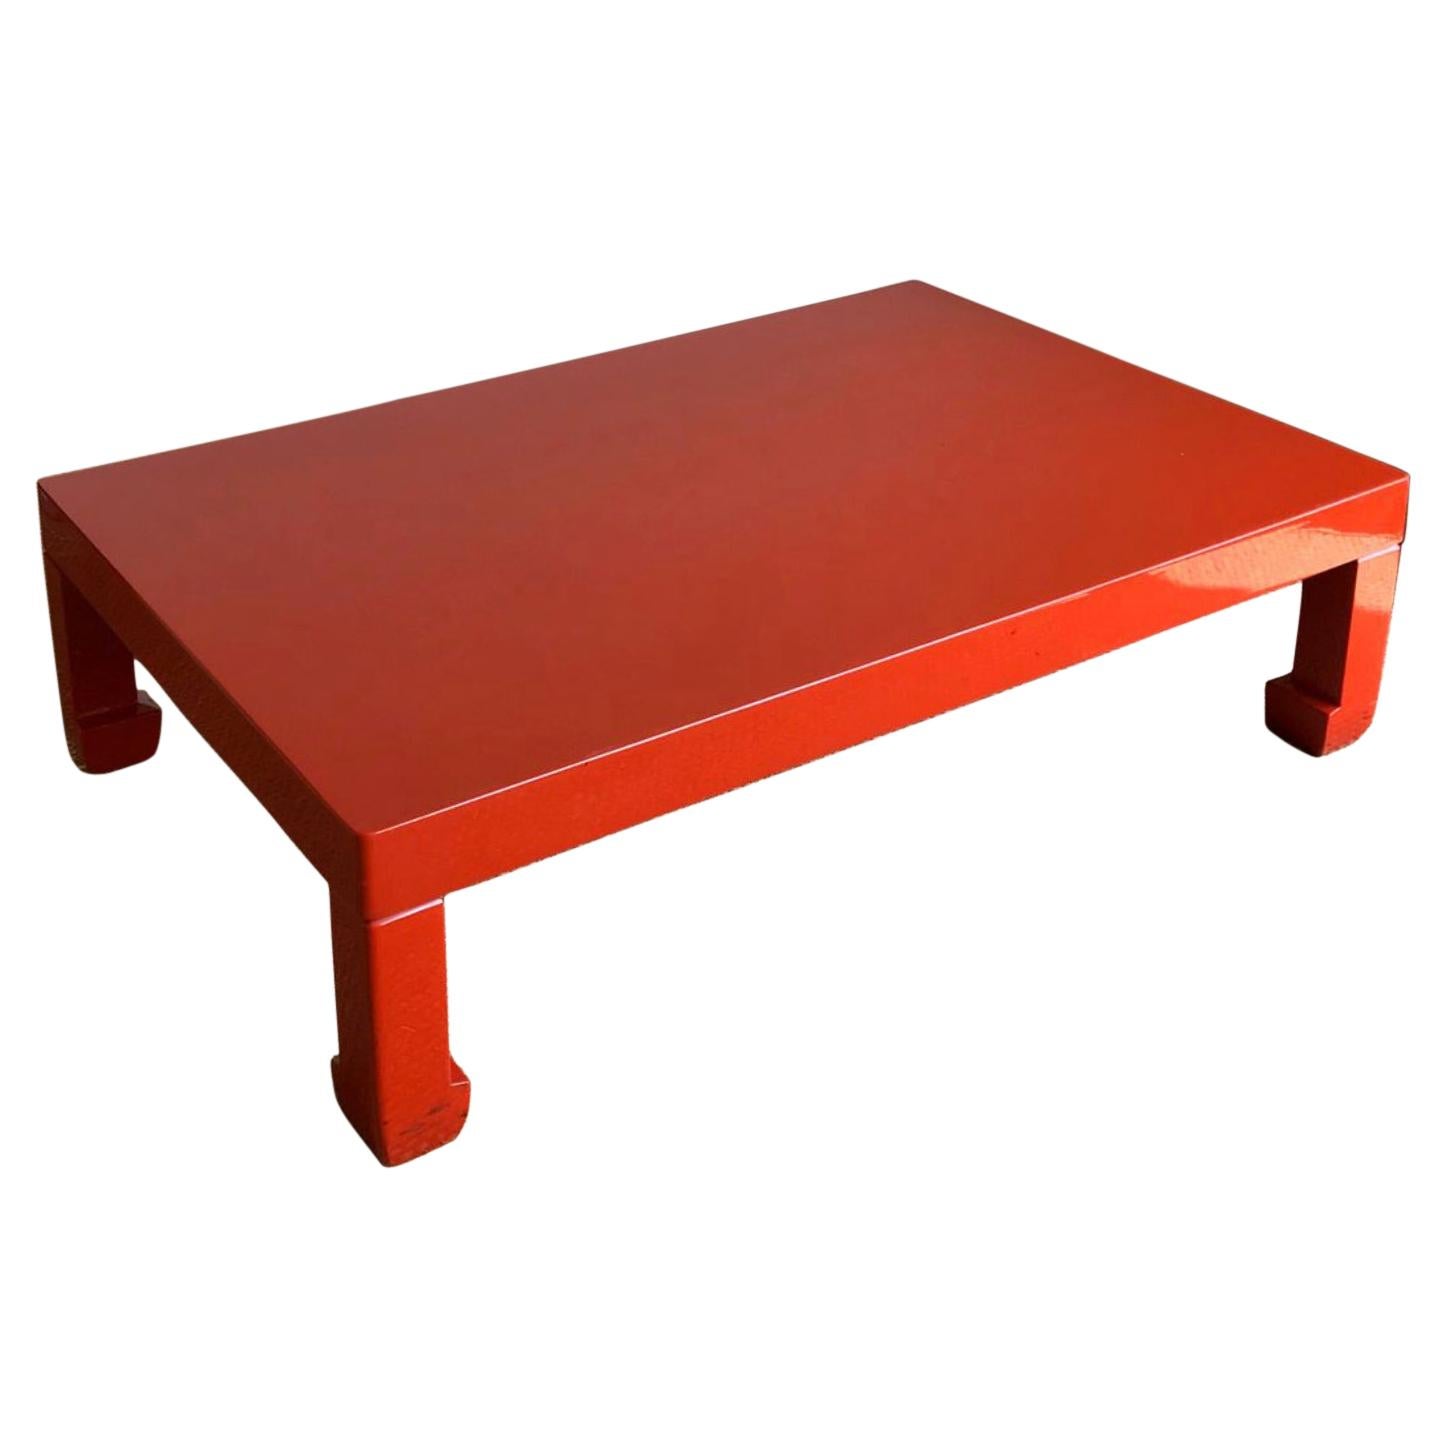 20th Century Fire Red Lacquer Low Table in Chinese Style